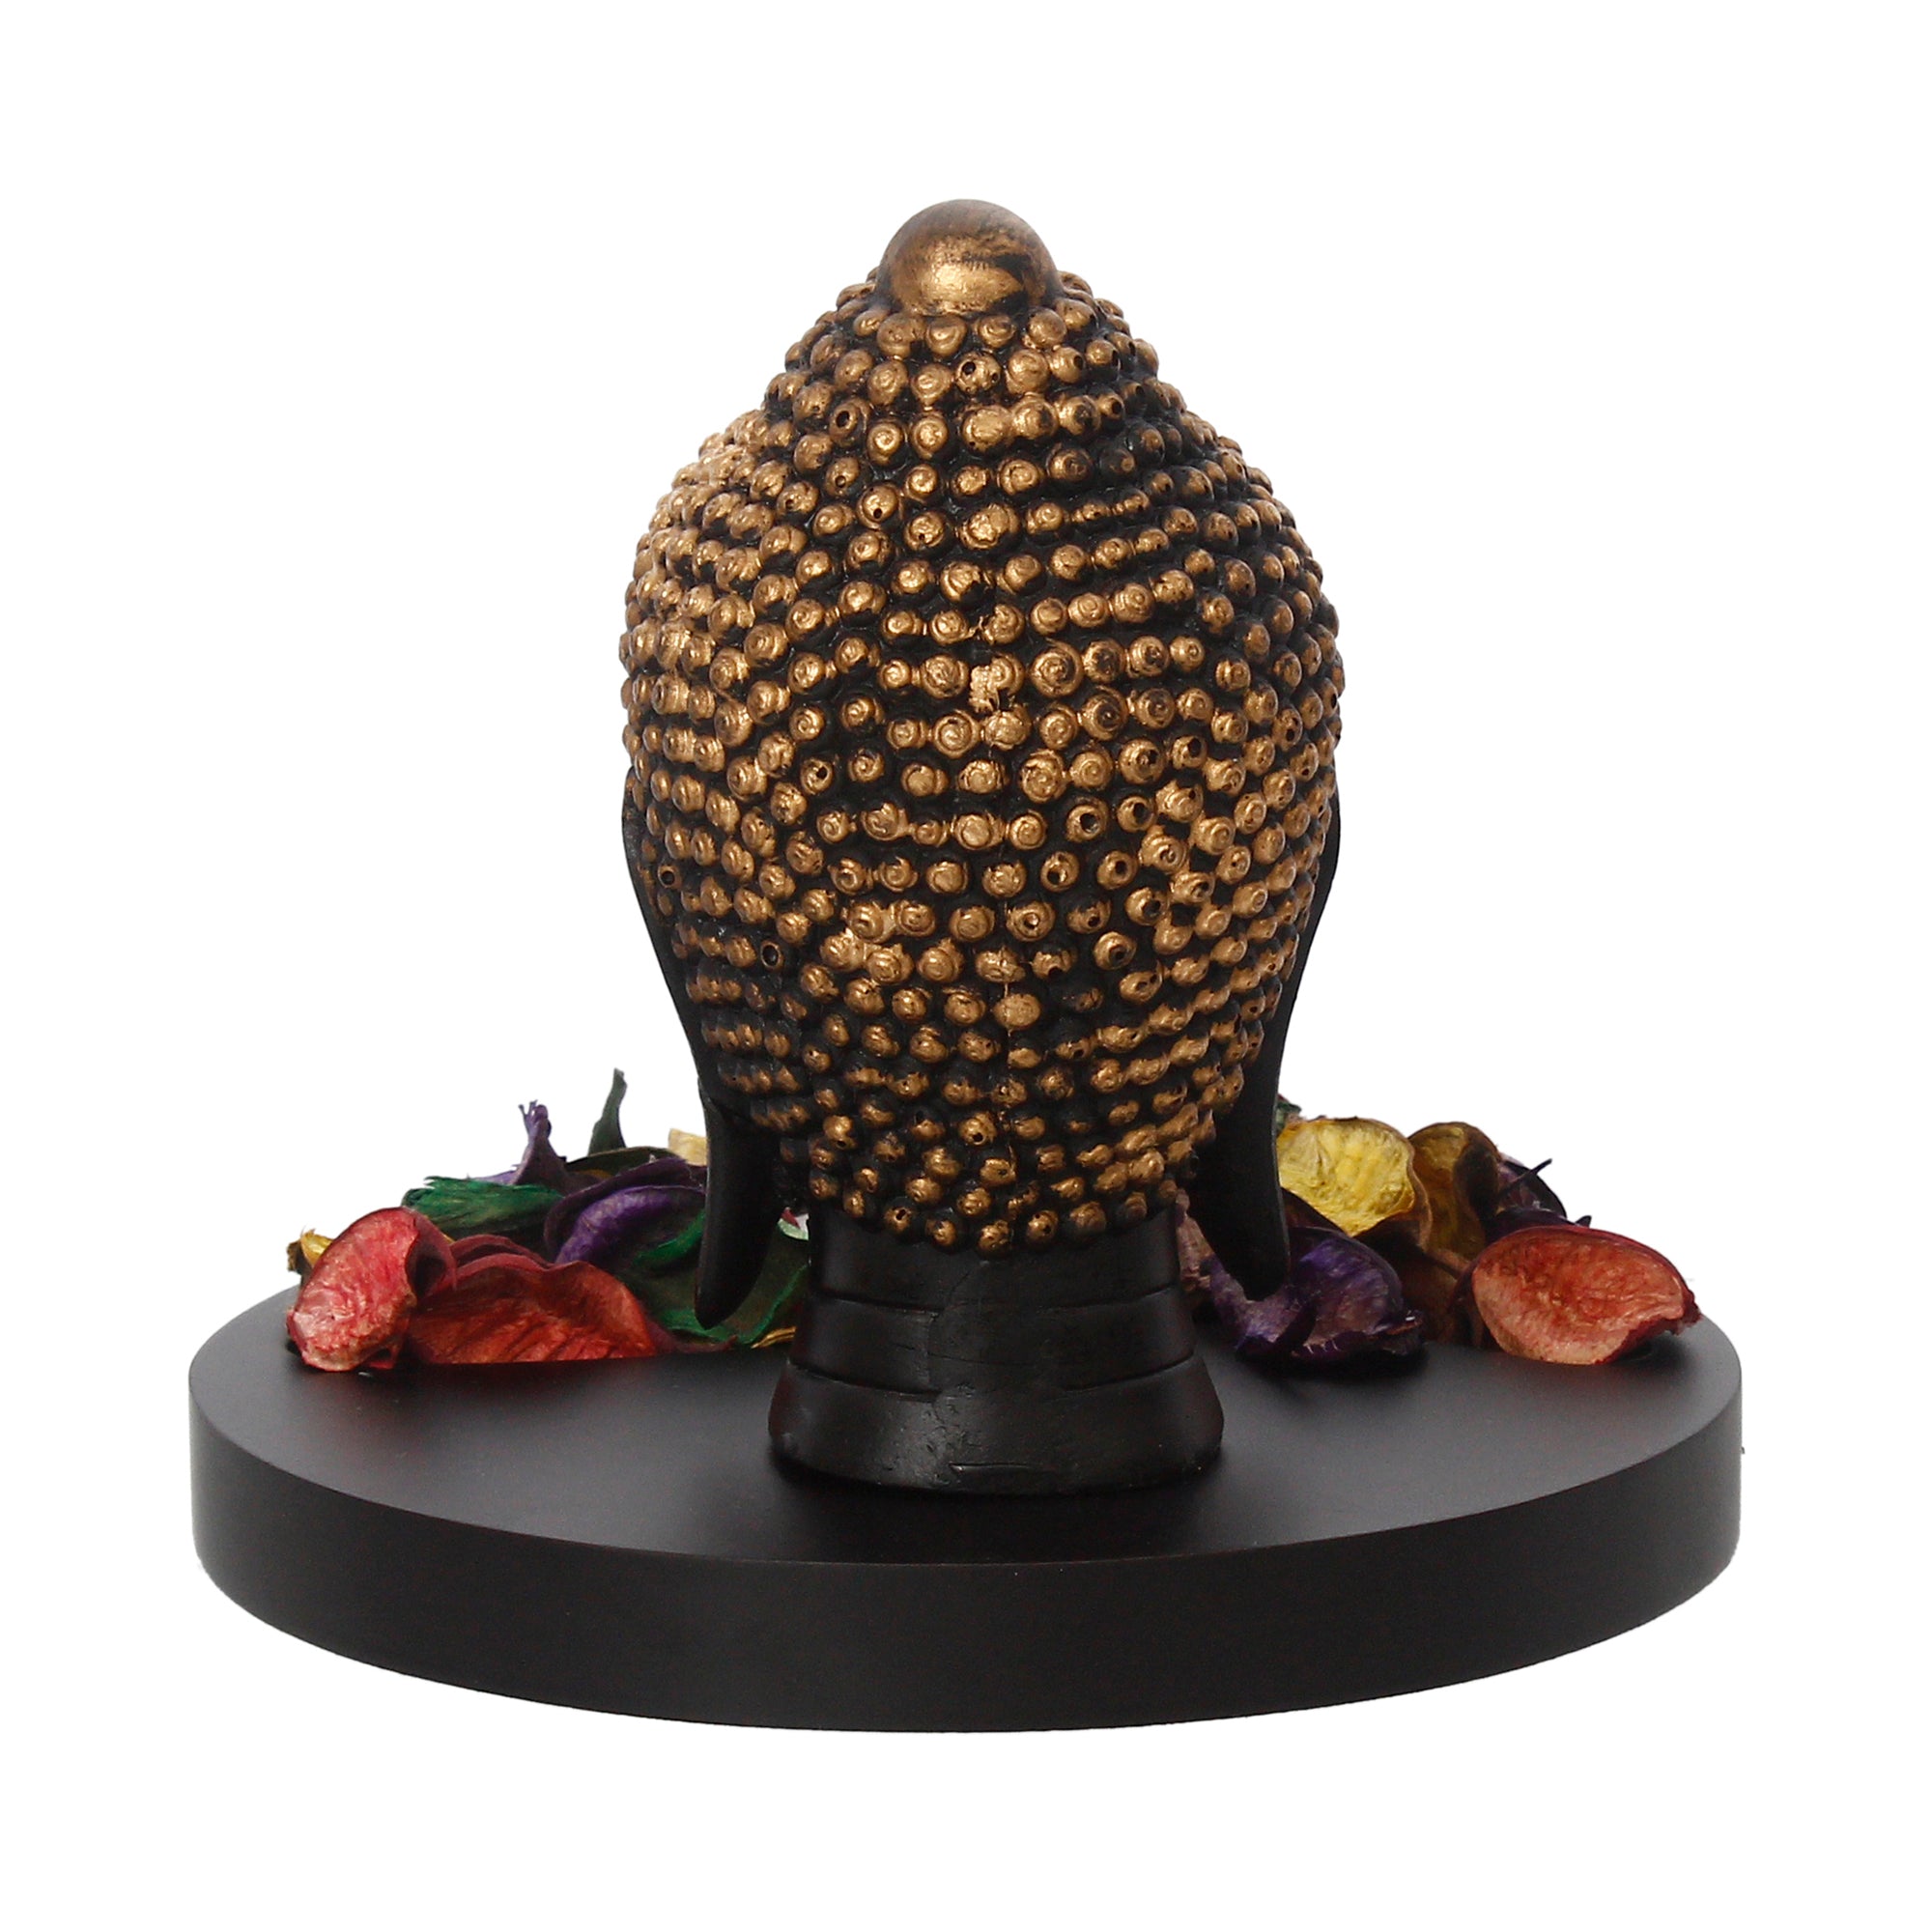 Decorative Black and Golden Buddha Head Statue with Wooden Base, Fragranced Petals and Tealight 6